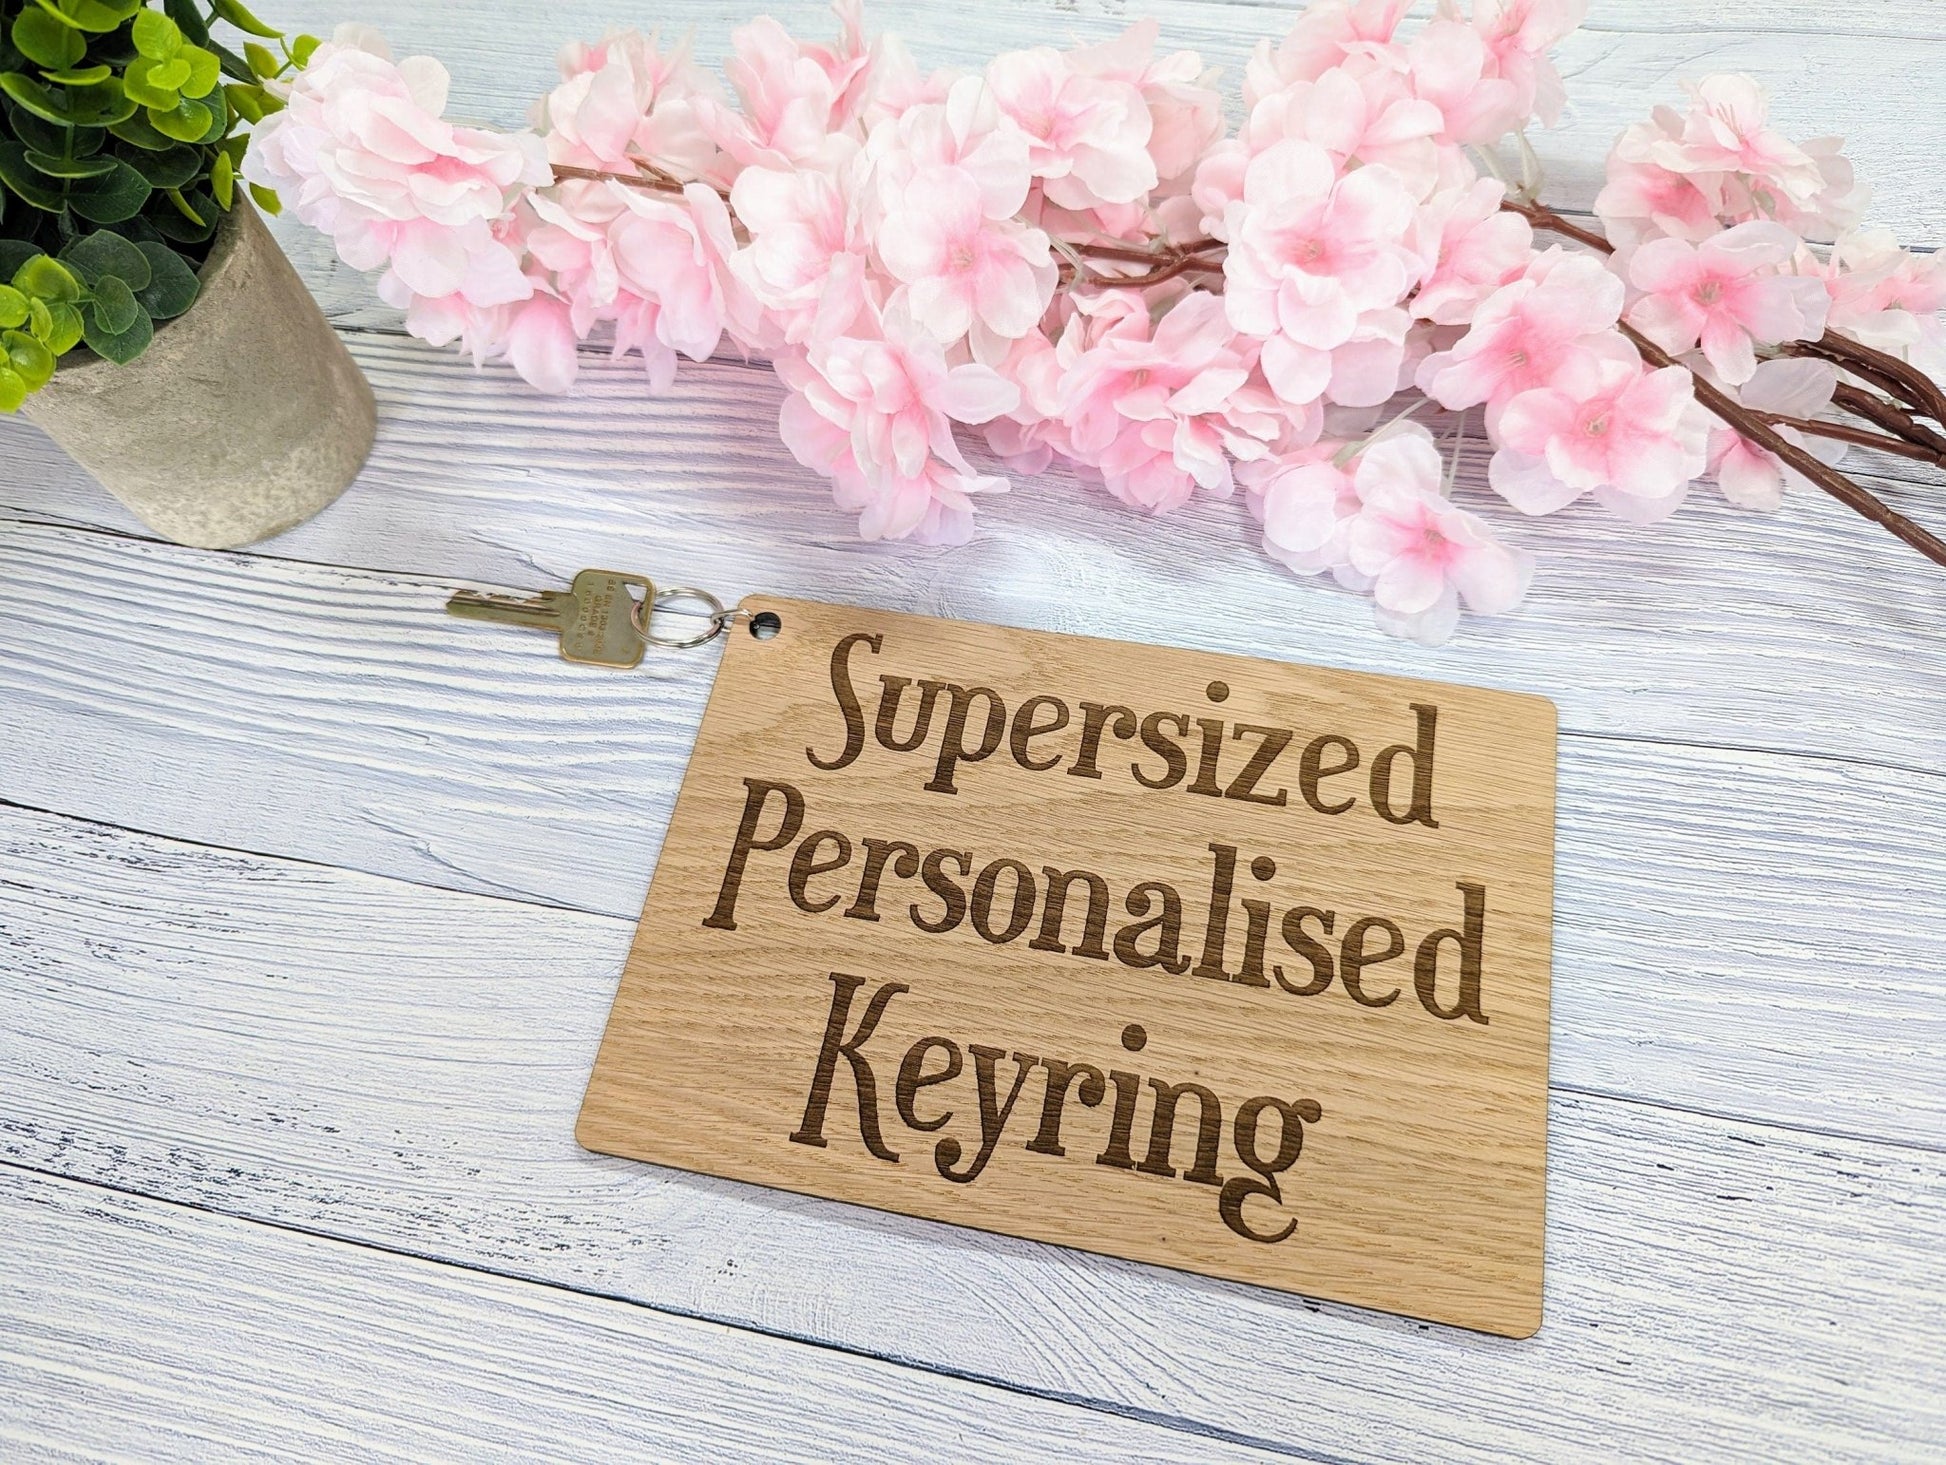 Supersized A4 Wooden Keyring - 297x210mm - Personalise with Any Text - Ideal for Special Occasions or Unique Gifts - CherryGroveCraft